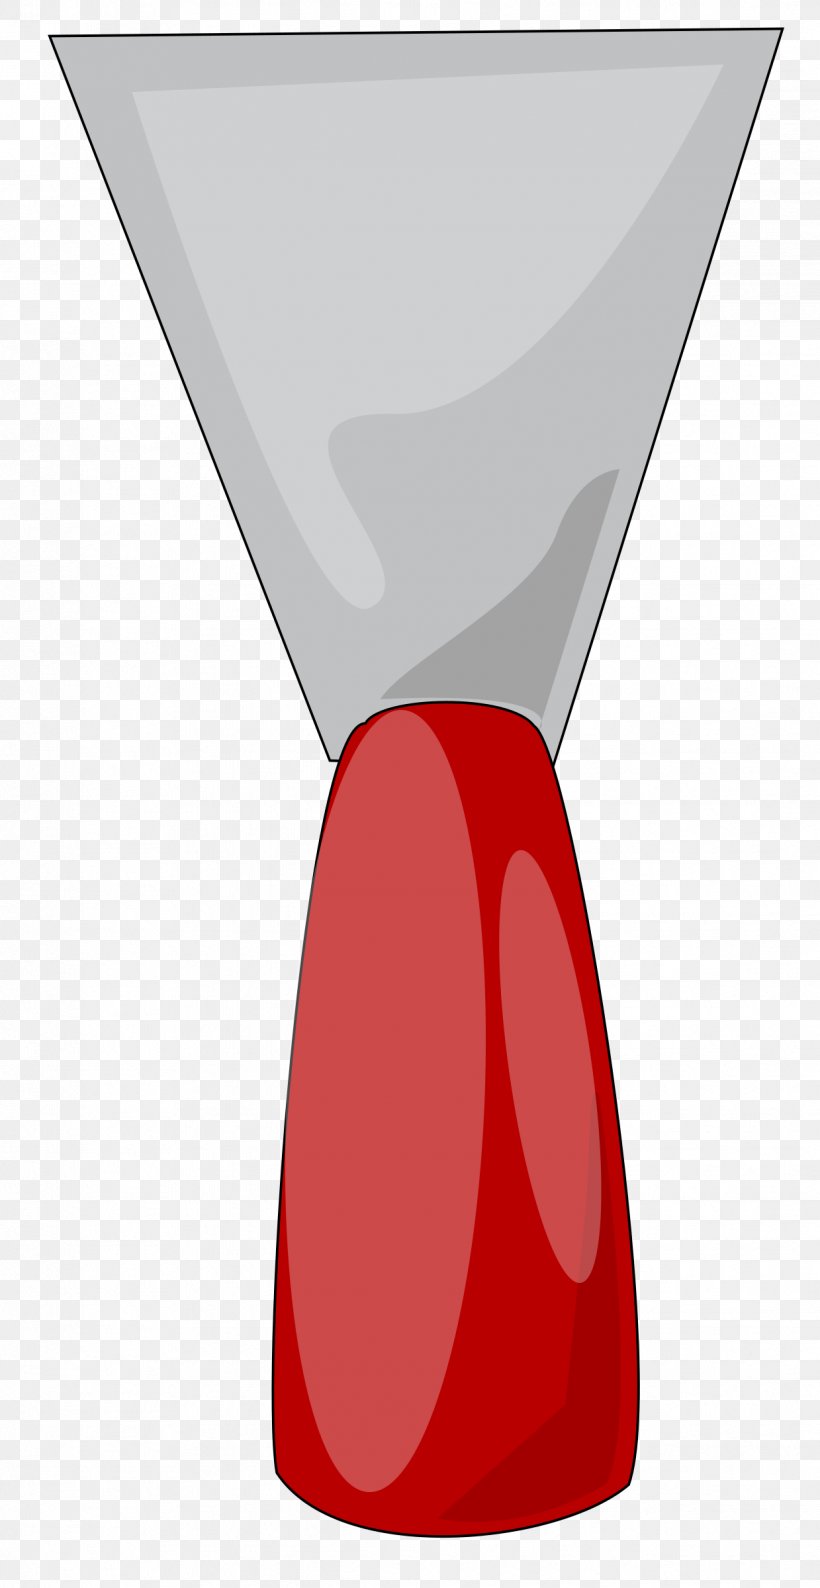 Putty Knife Download Clip Art, PNG, 1239x2400px, Putty Knife, Red, Spatula, Tool Download Free